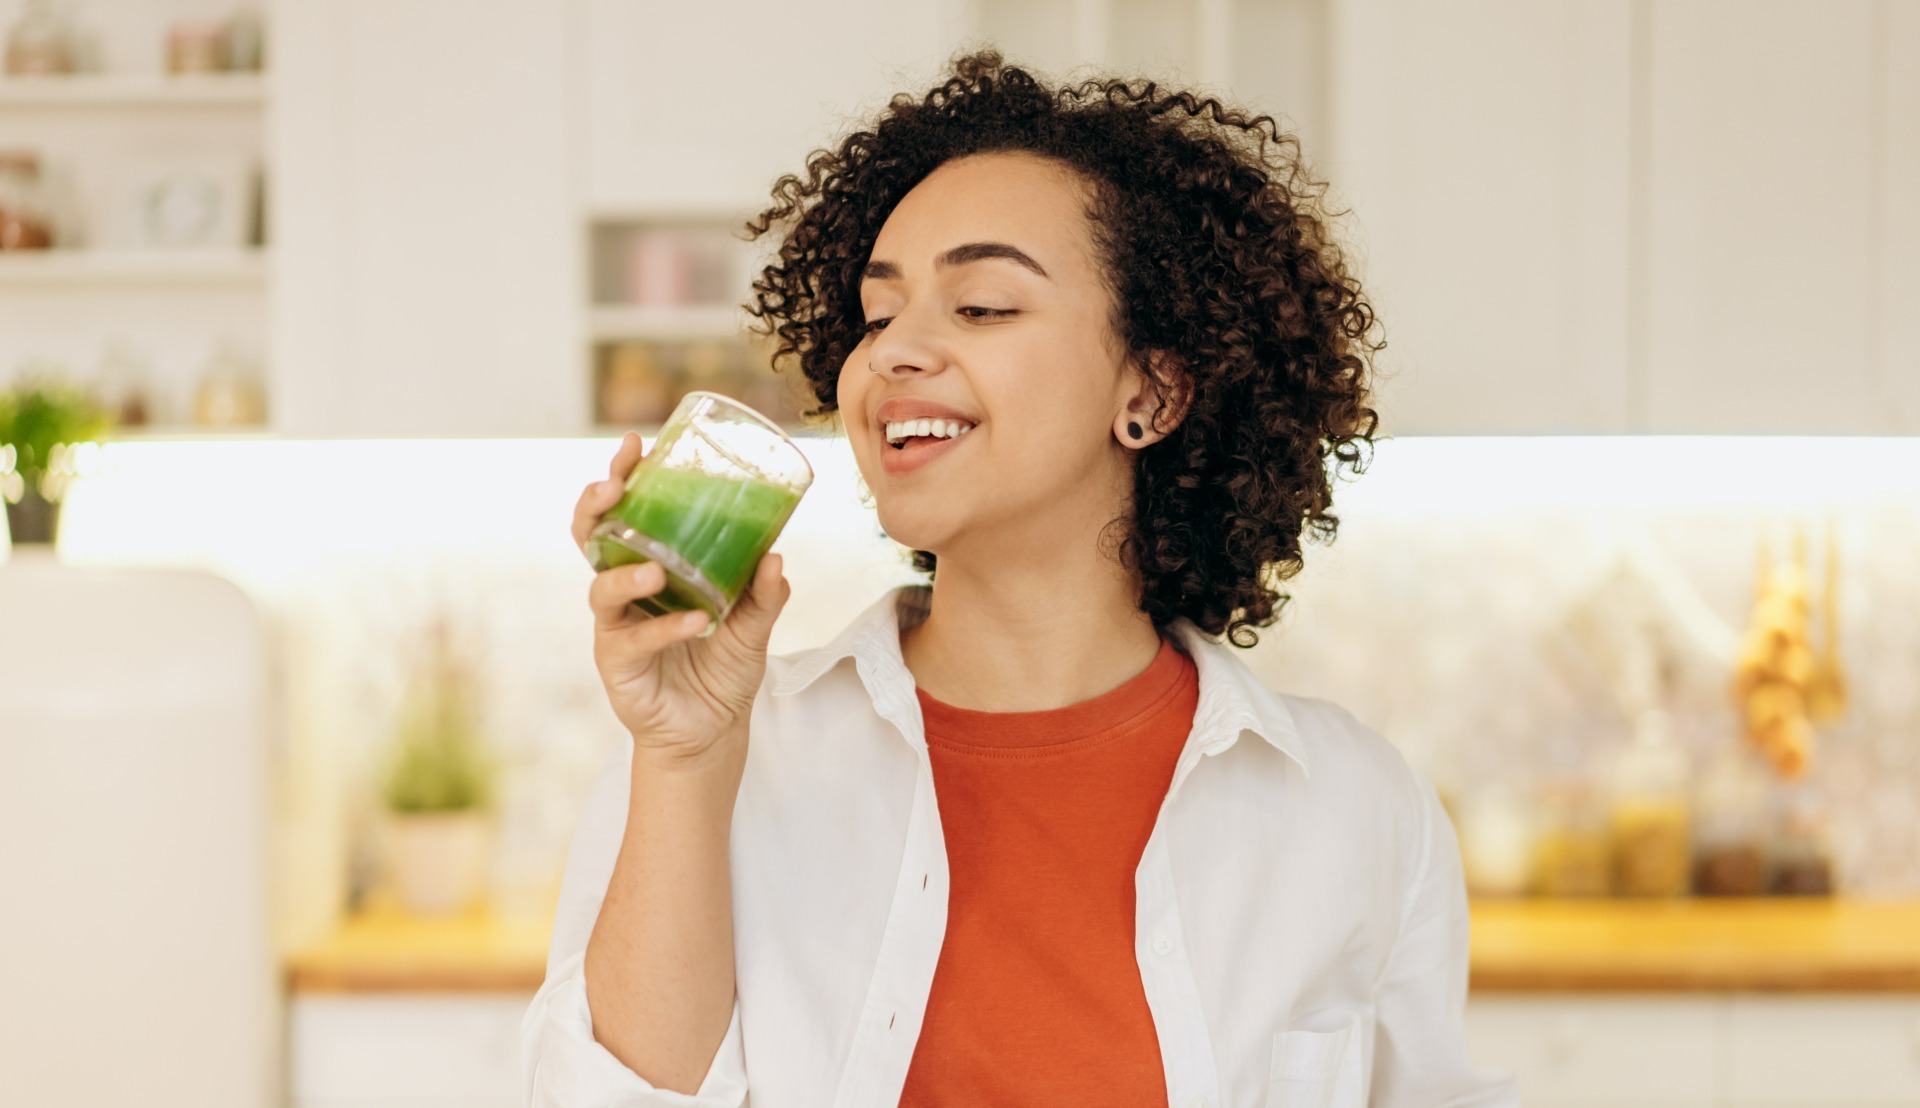 Woman drinking green smoothie - Young Living Lavender Life Blog 